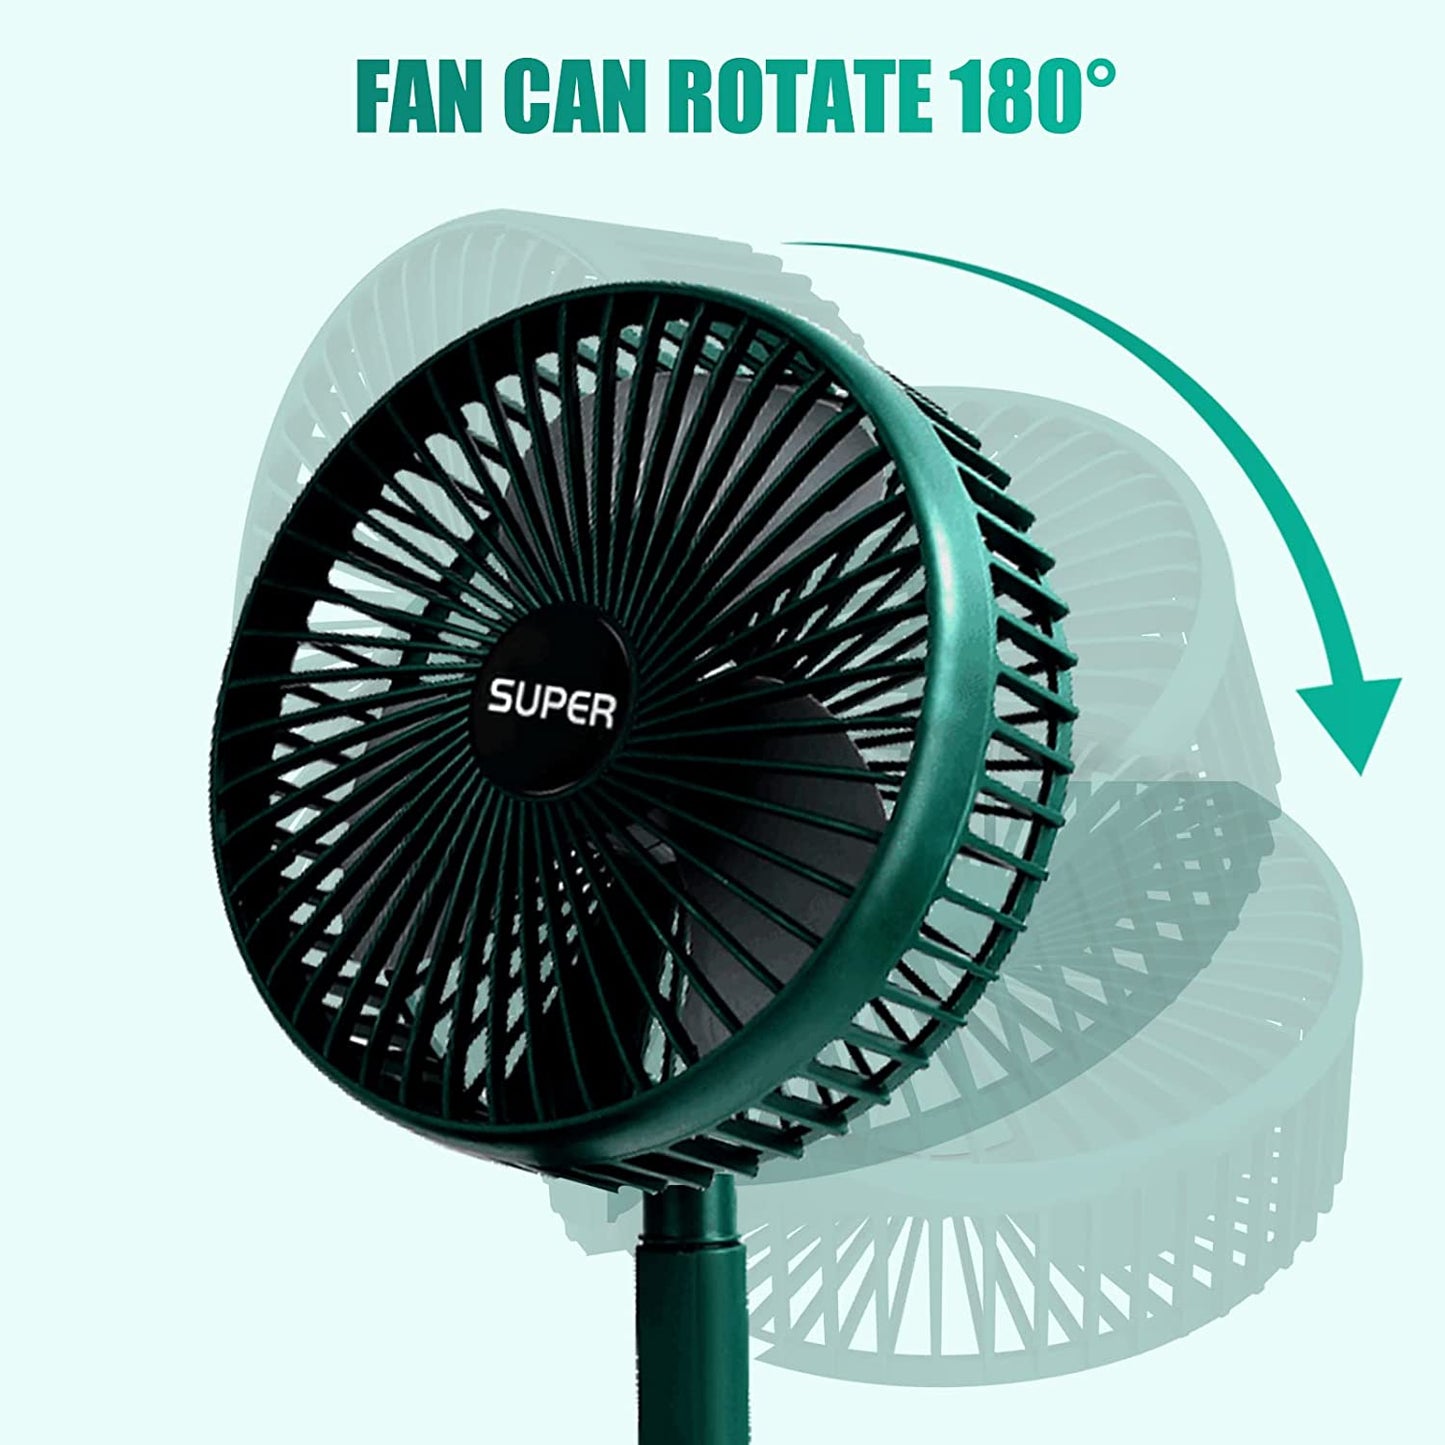 4613 Telescopic Electric Desktop Fan, Height Adjustable, Foldable & Portable for Travel/Carry | Silent Table Top Personal Fan for Bedside, Office Table DeoDap